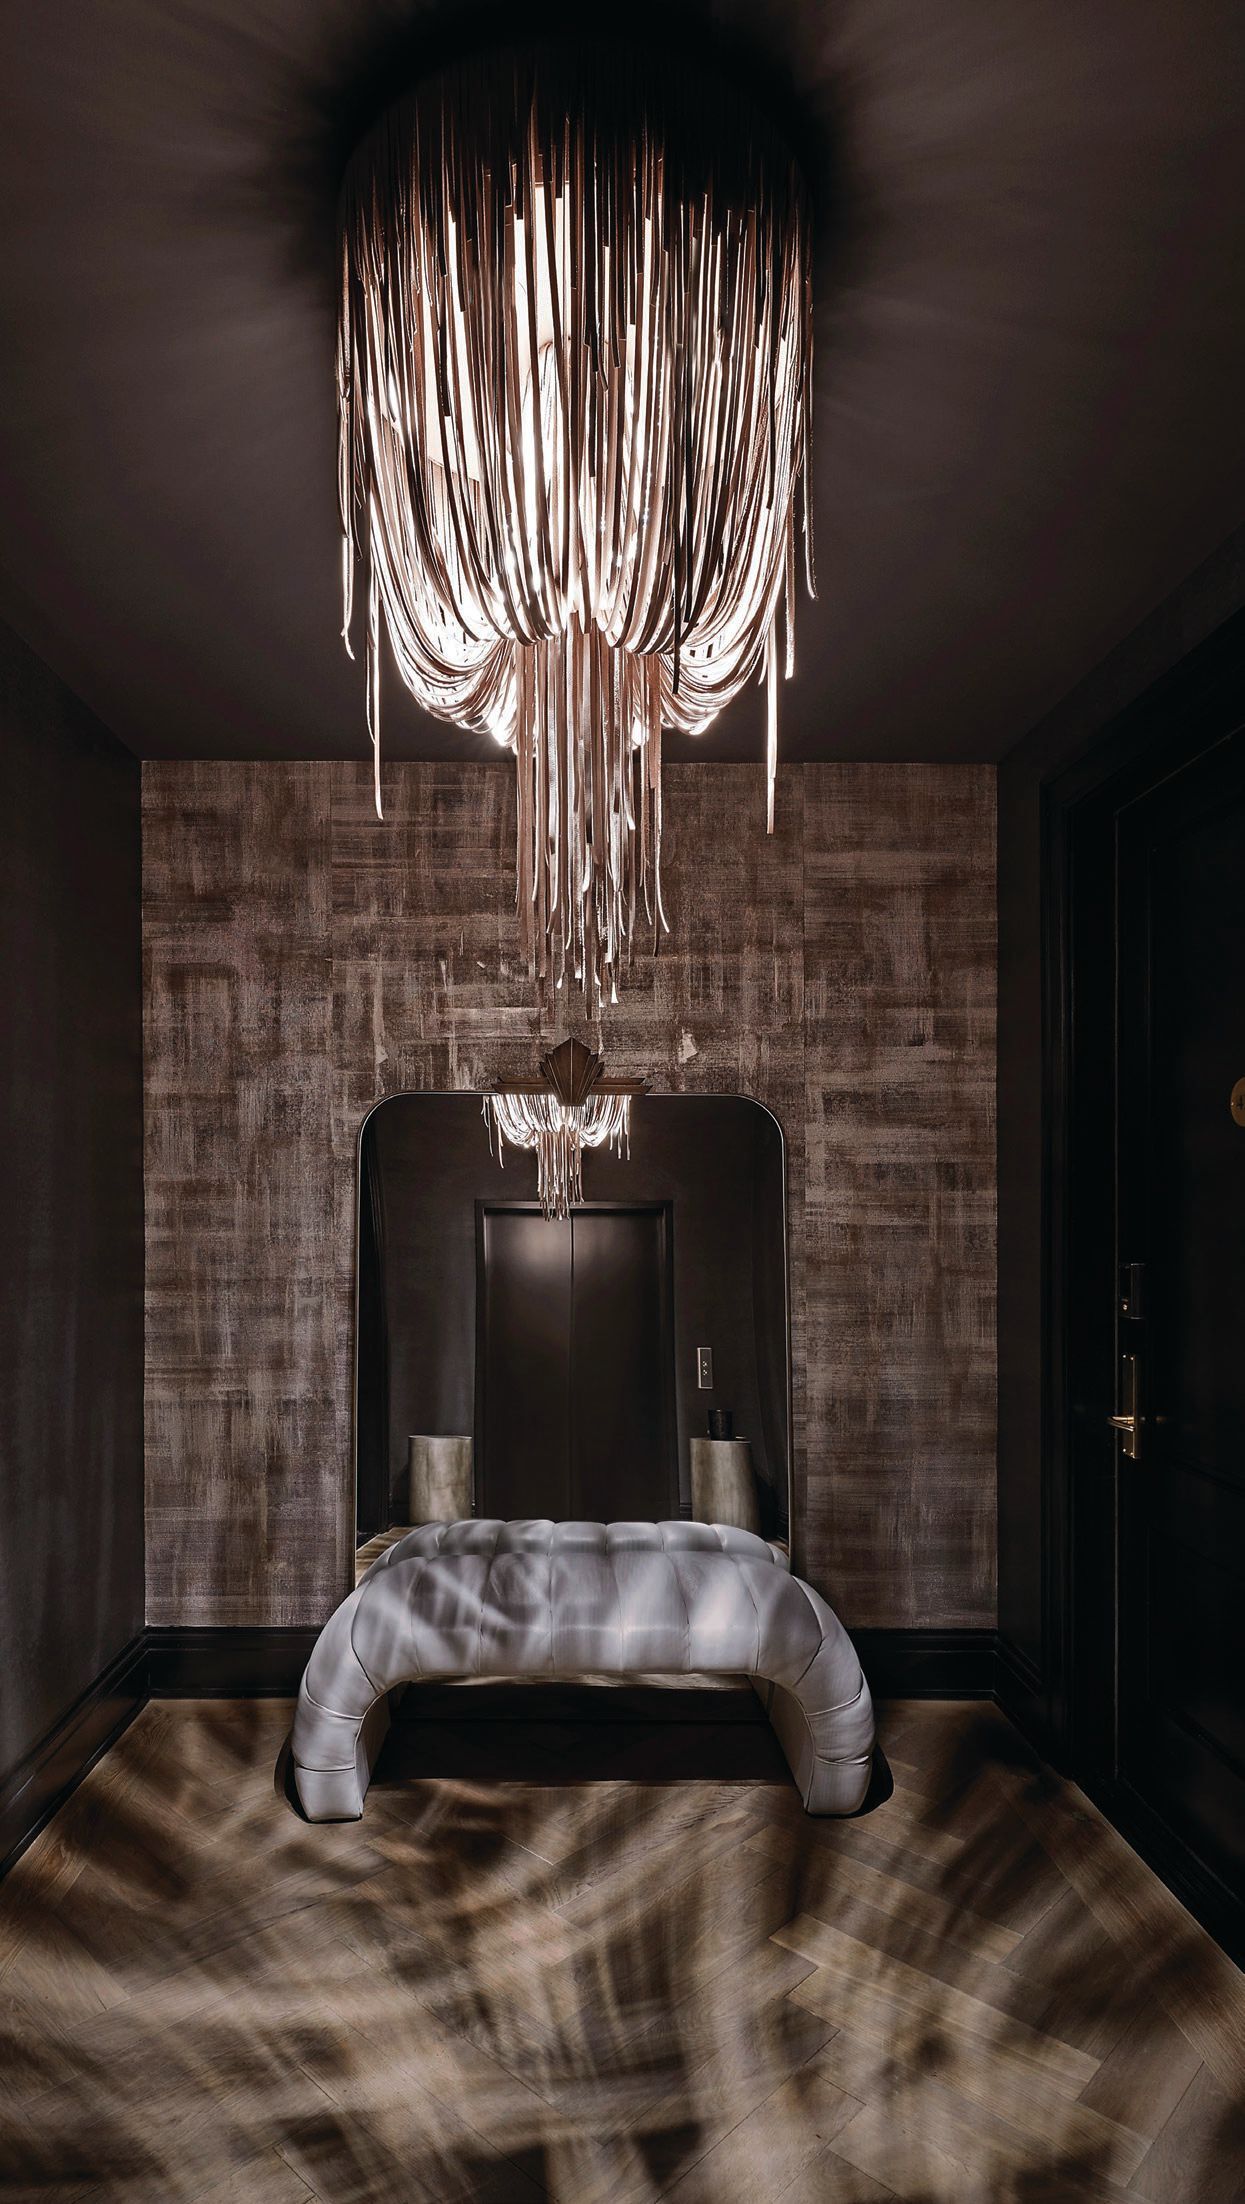 Ngala Trading’s Urchin chandelier in champagne metallic leather plus Studio BK’s Broken Metal wallpaper add up to a showstopping first impression in the elevator entry vestibule. Photographed by Anthony Tahlier